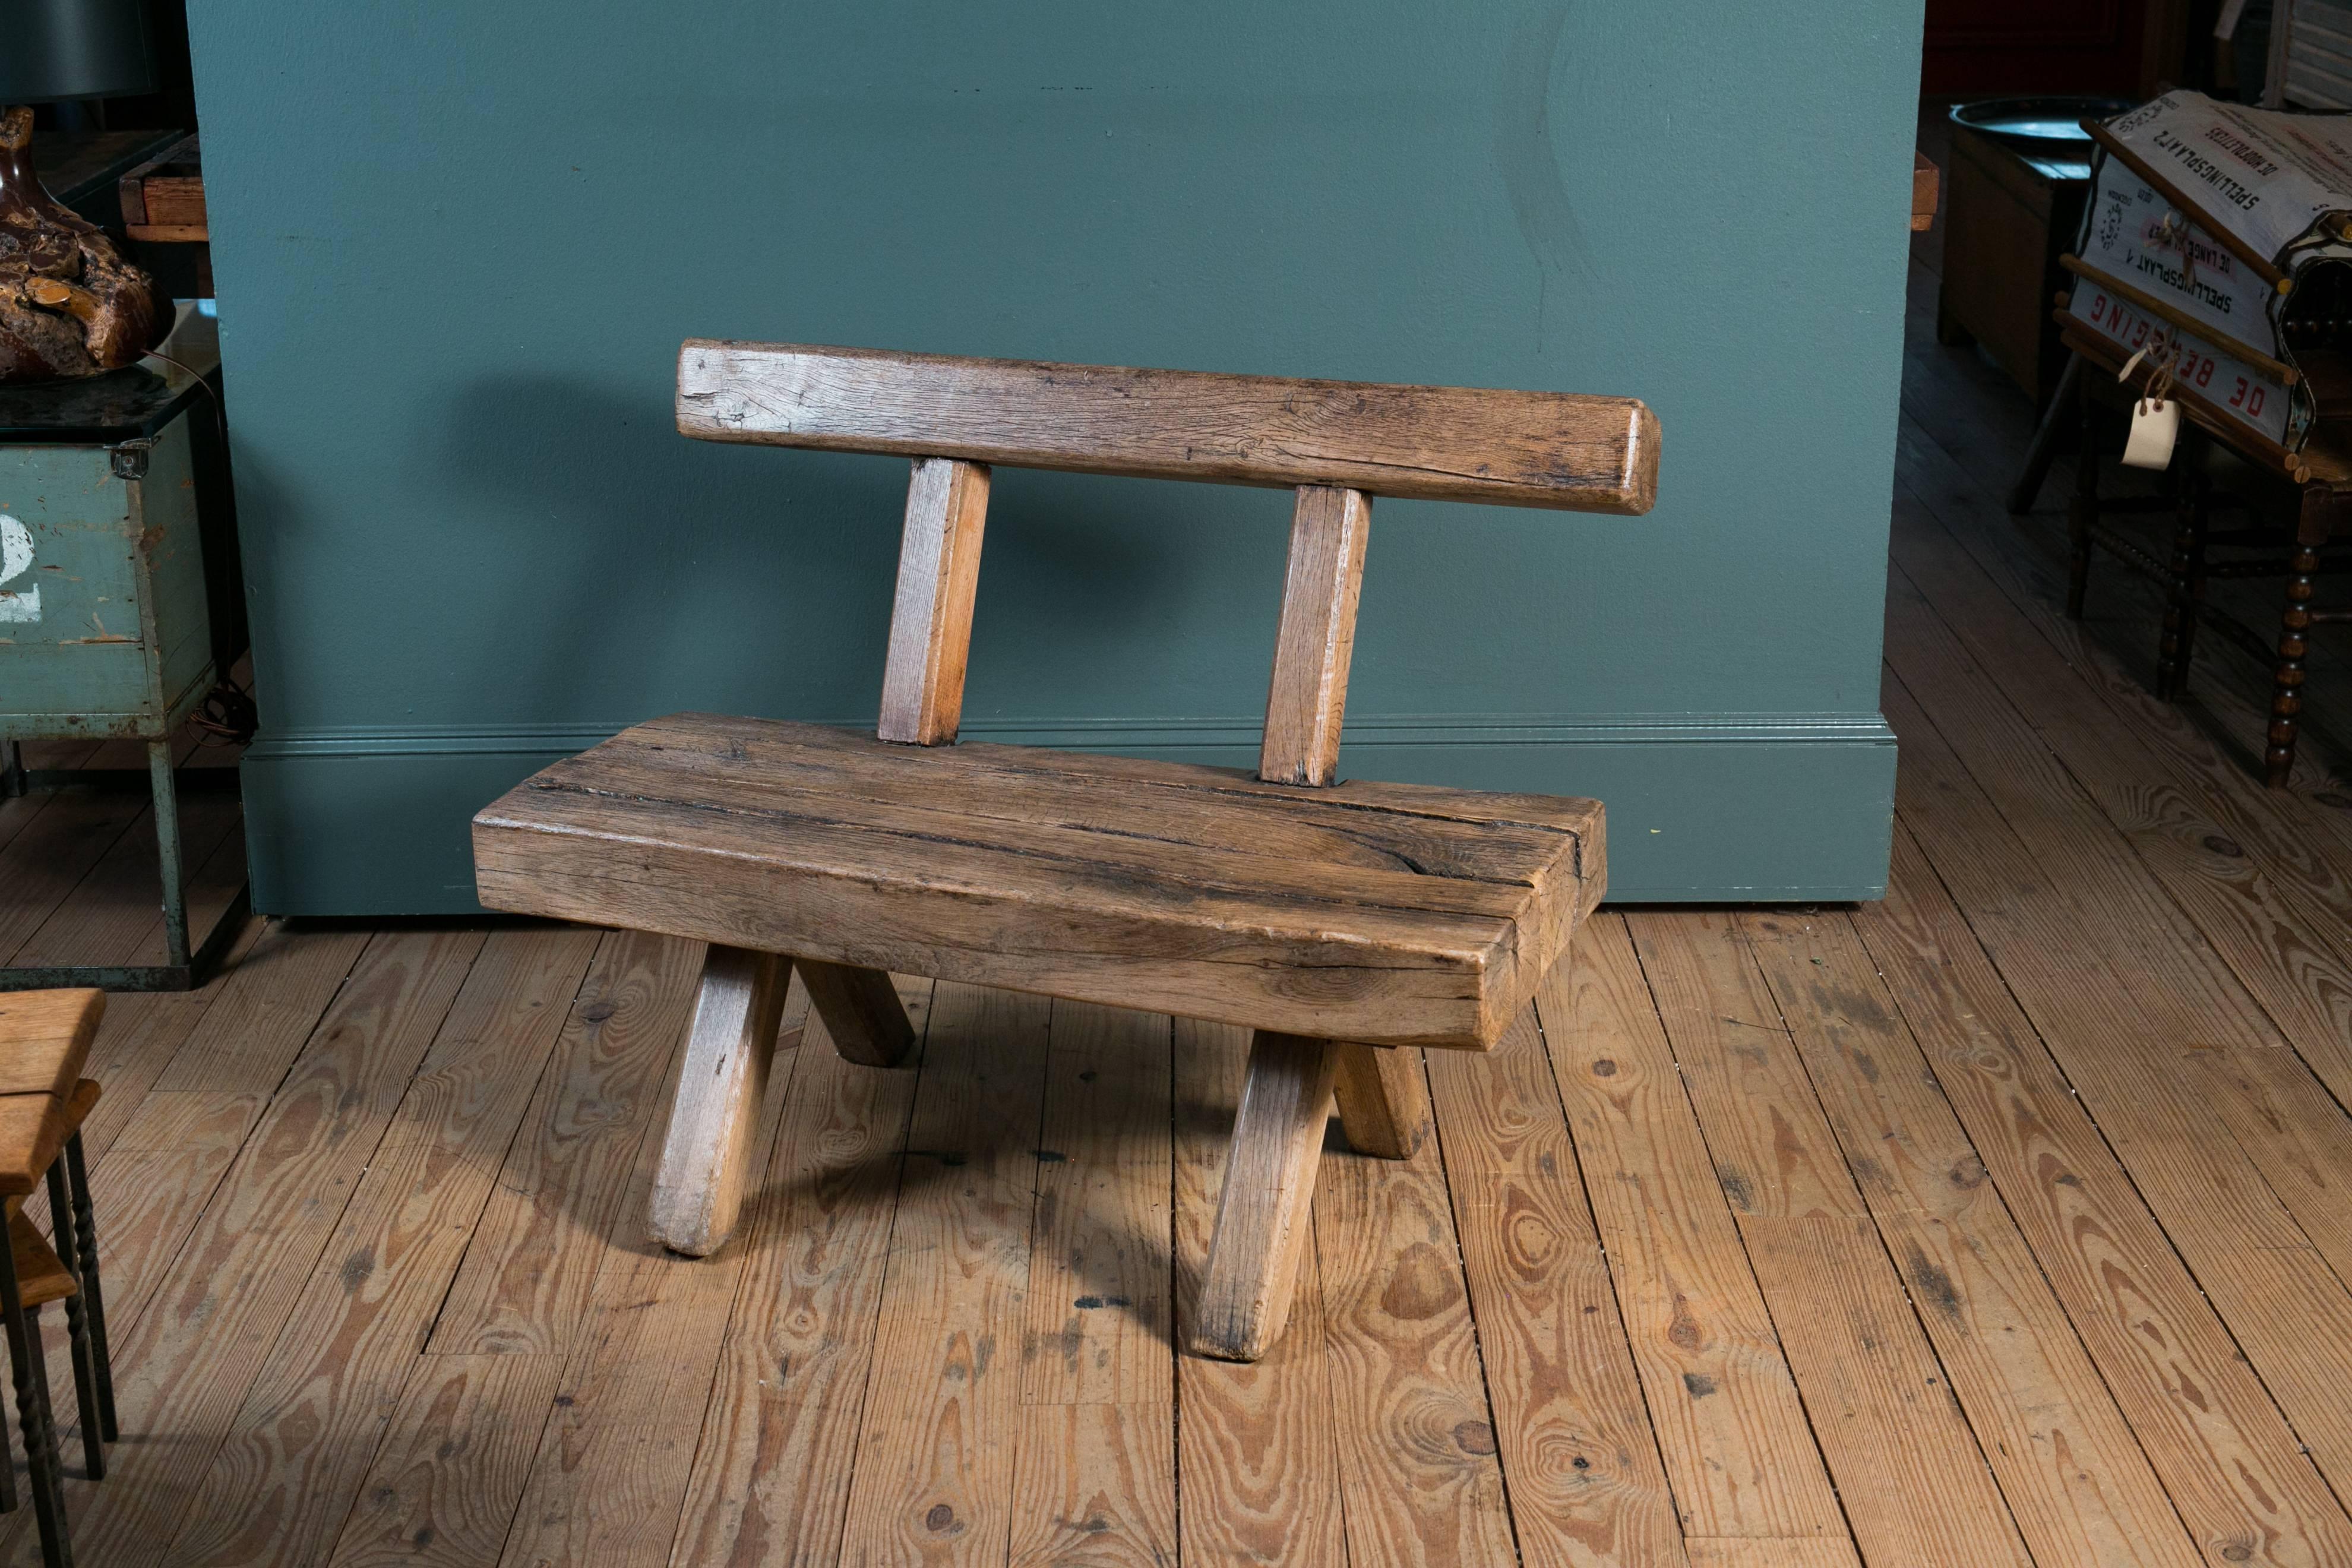 German Chunky Rustic Wooden Bench with Back, circa 1920